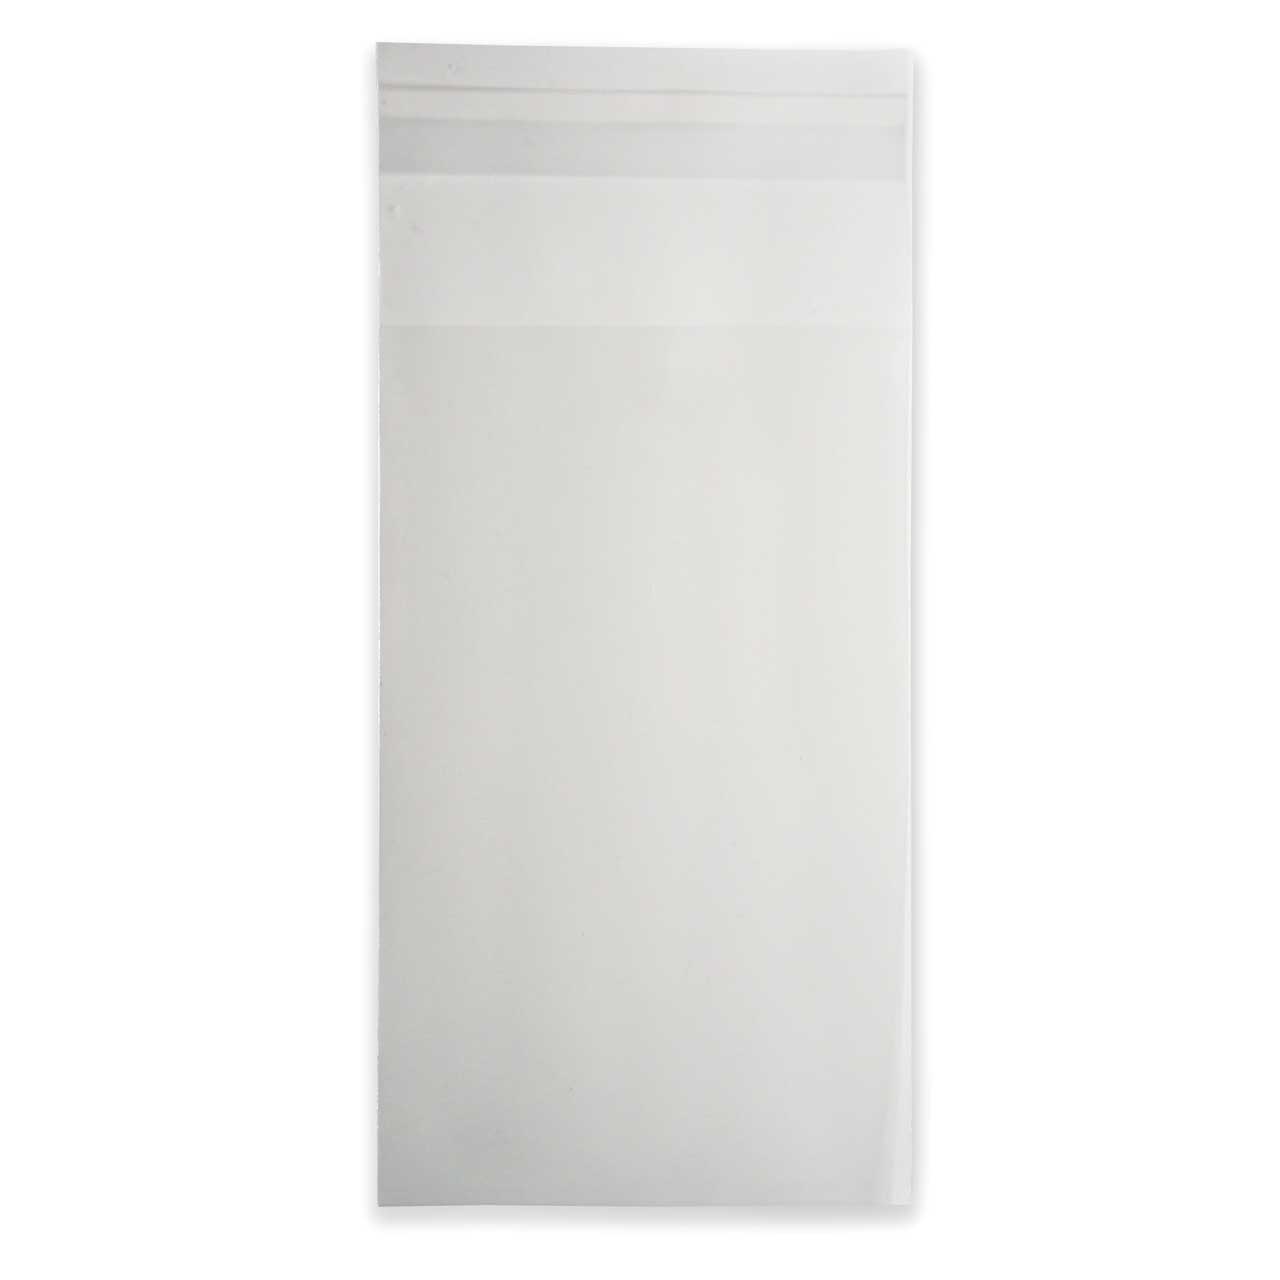 Clear Poly Zipper Bags 5 x 7 Resealable Plastic Bags 2 Mil [100 Pack]